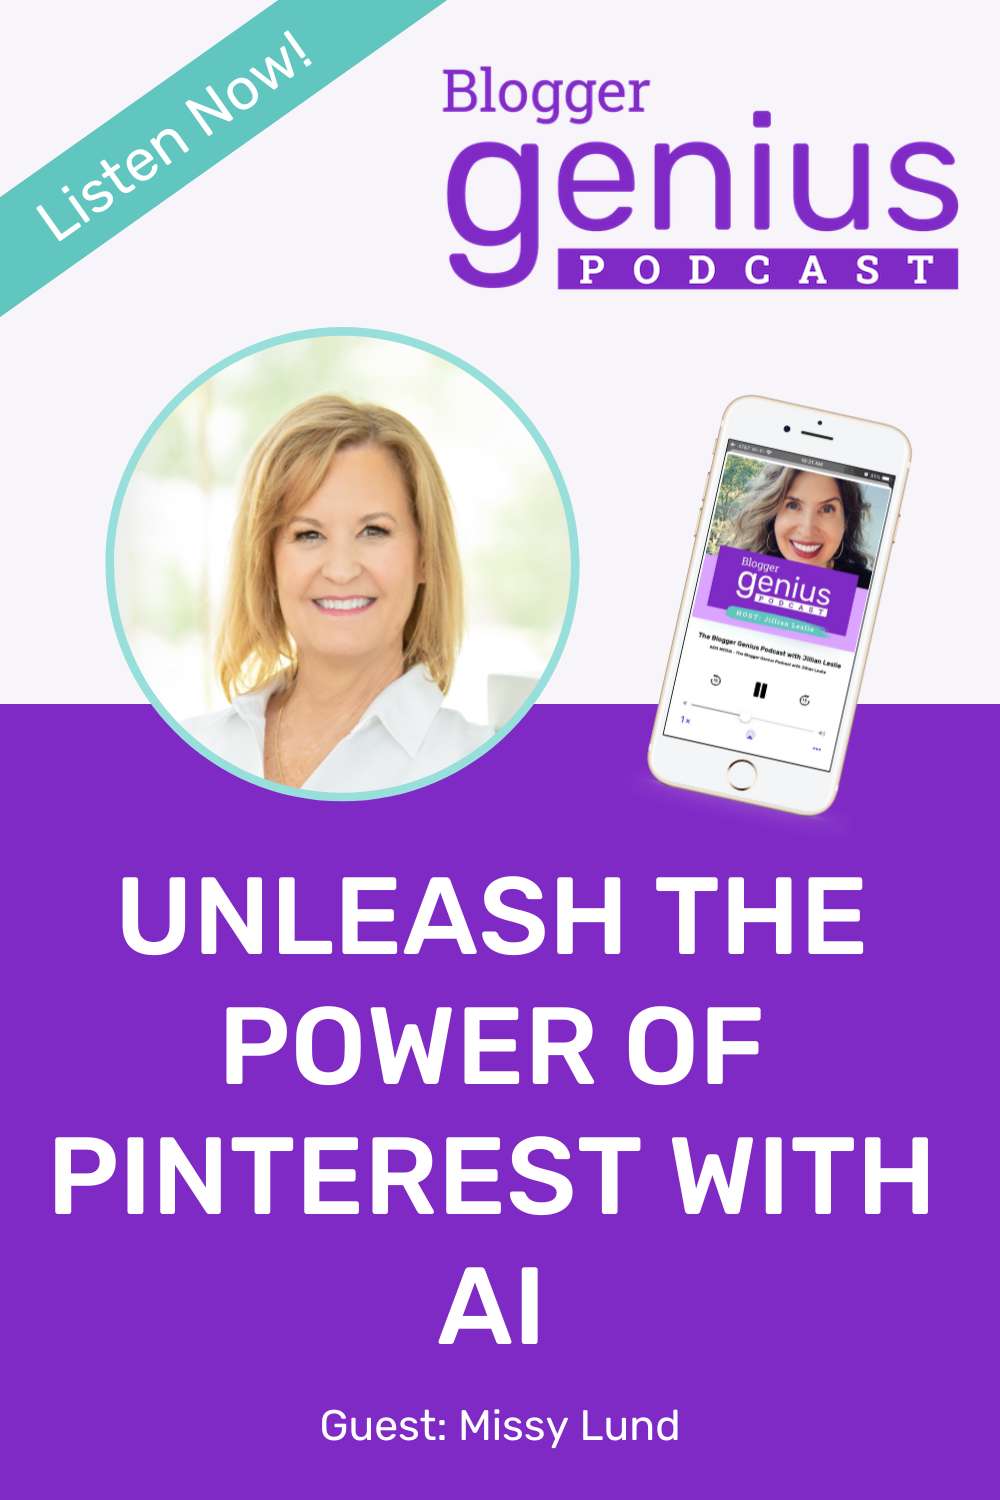 Unleashing the Power of Pinterest with AI | The Blogger Genius Podcast with Jillian Leslie